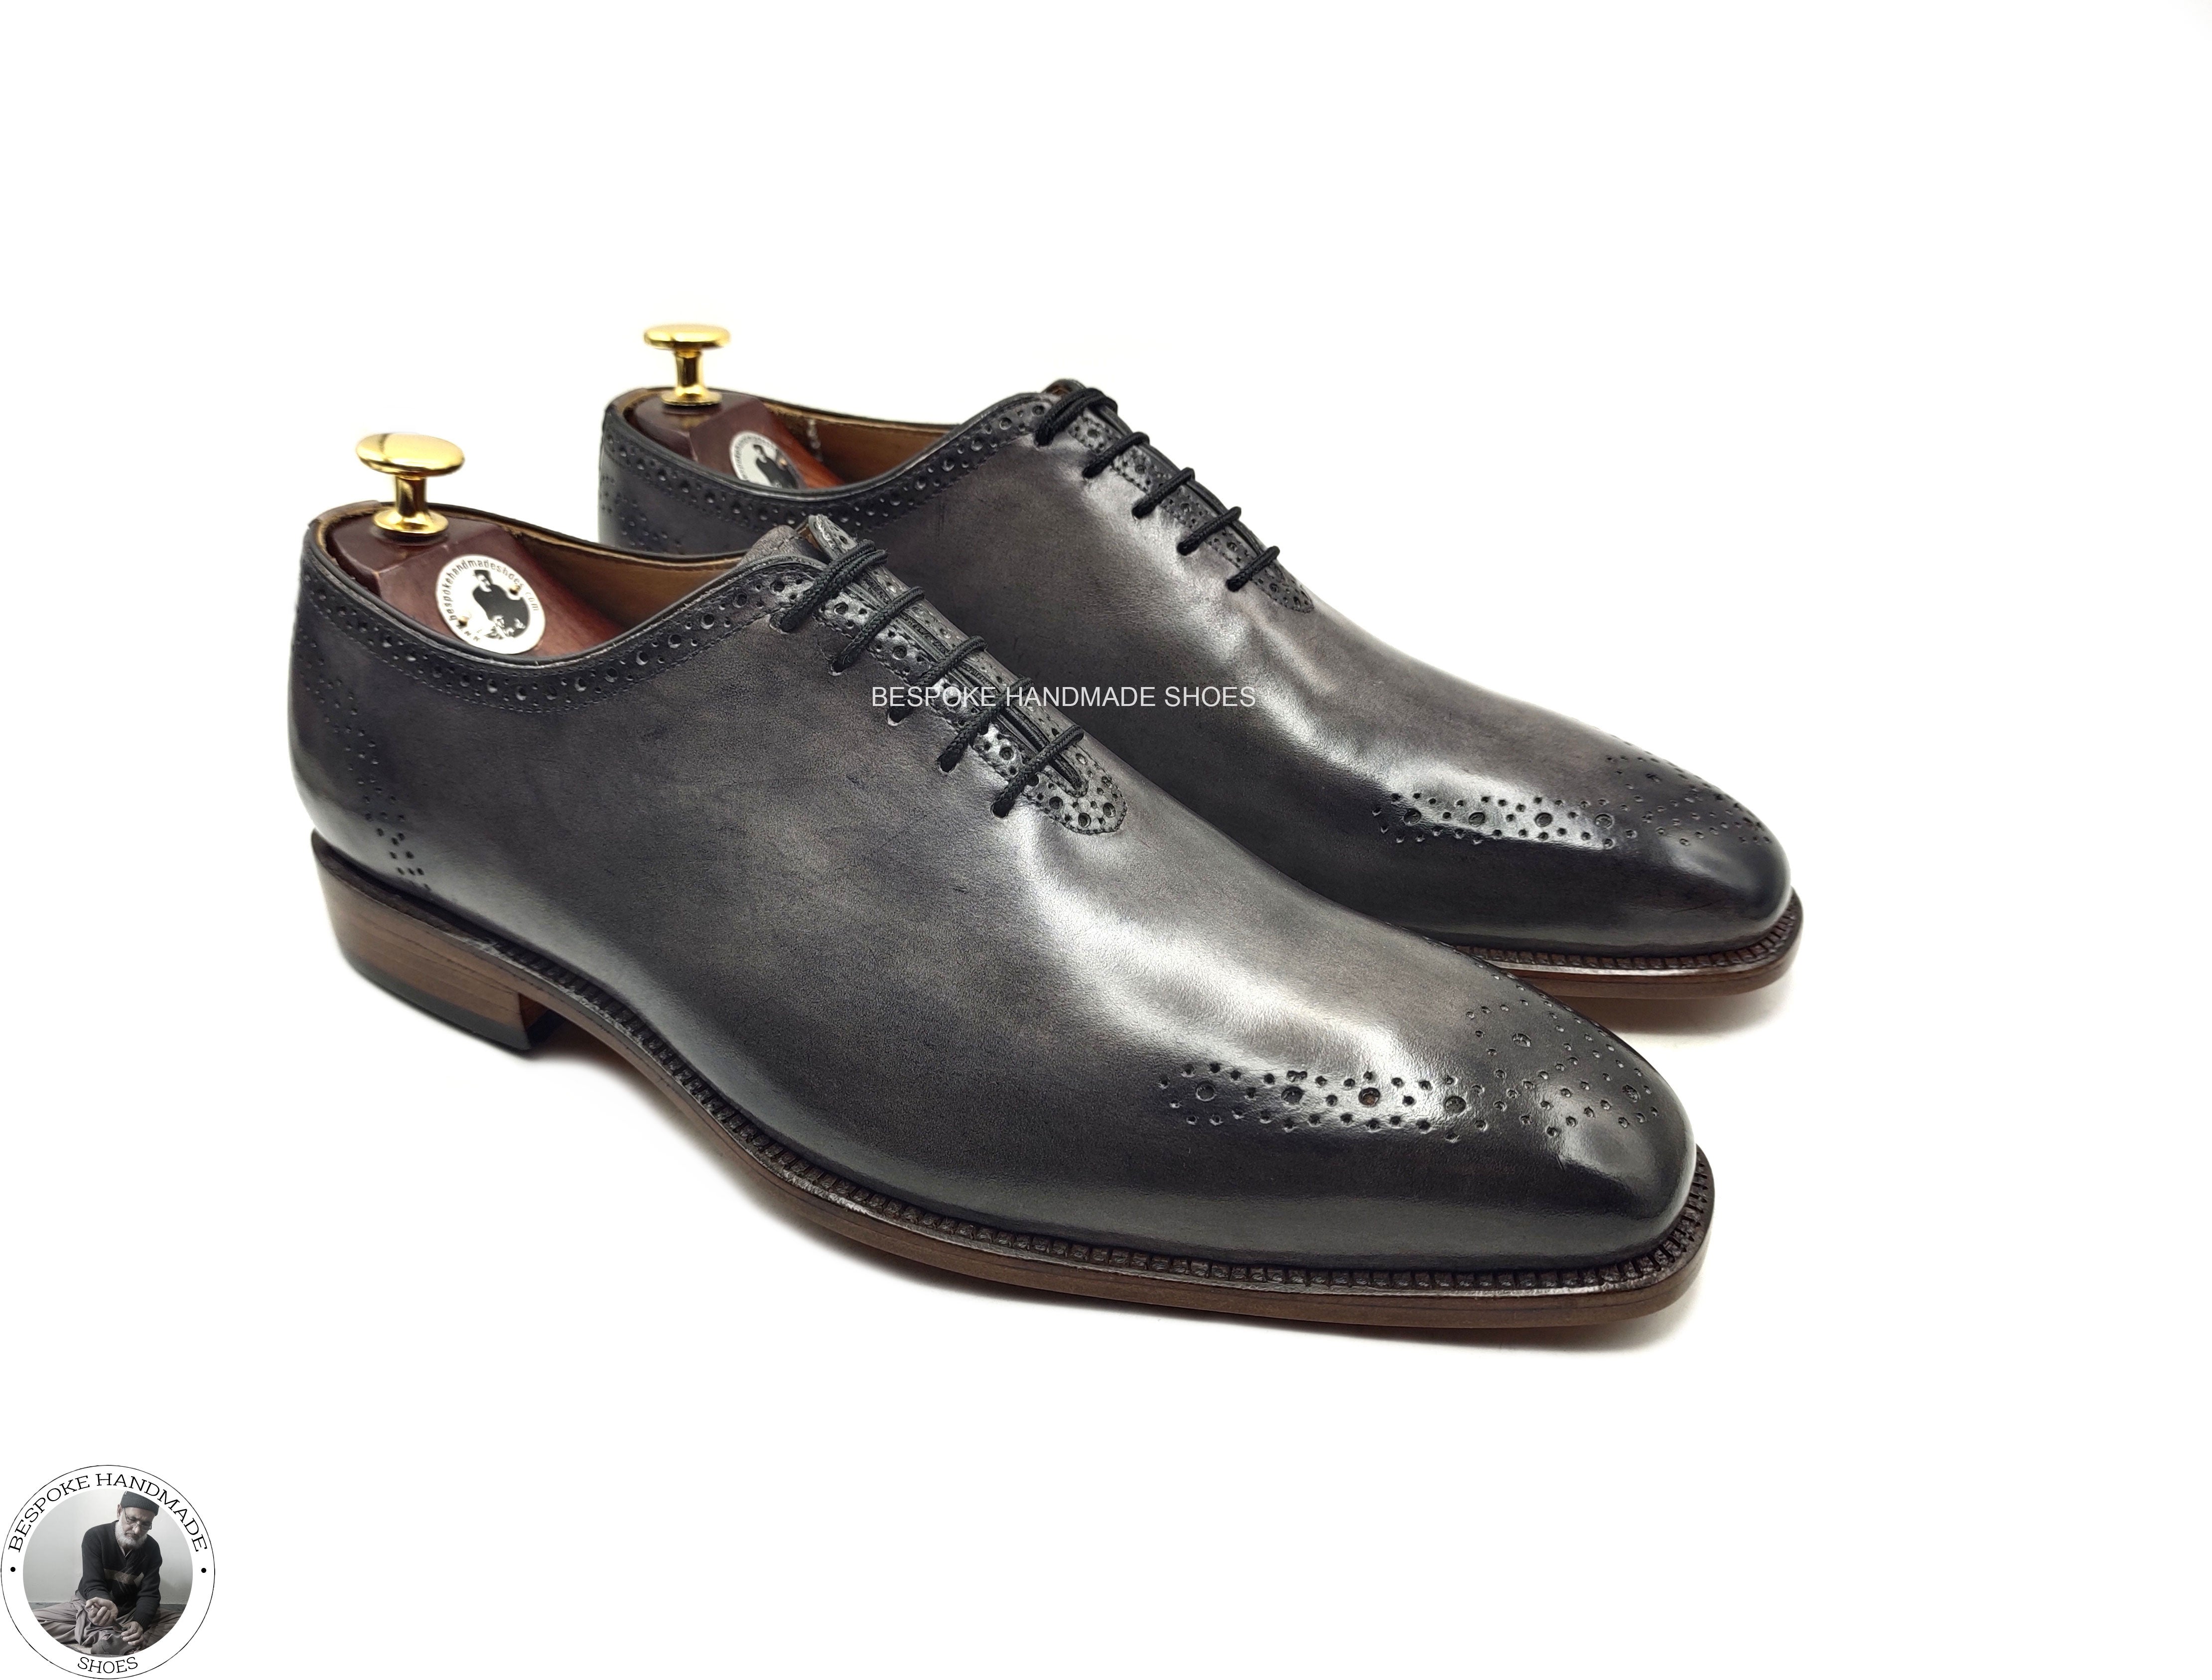 Premium Quality Gray Leather Black Shaded Shoes, Men Oxford Brogue Lace up Dress Wholecut Shoes